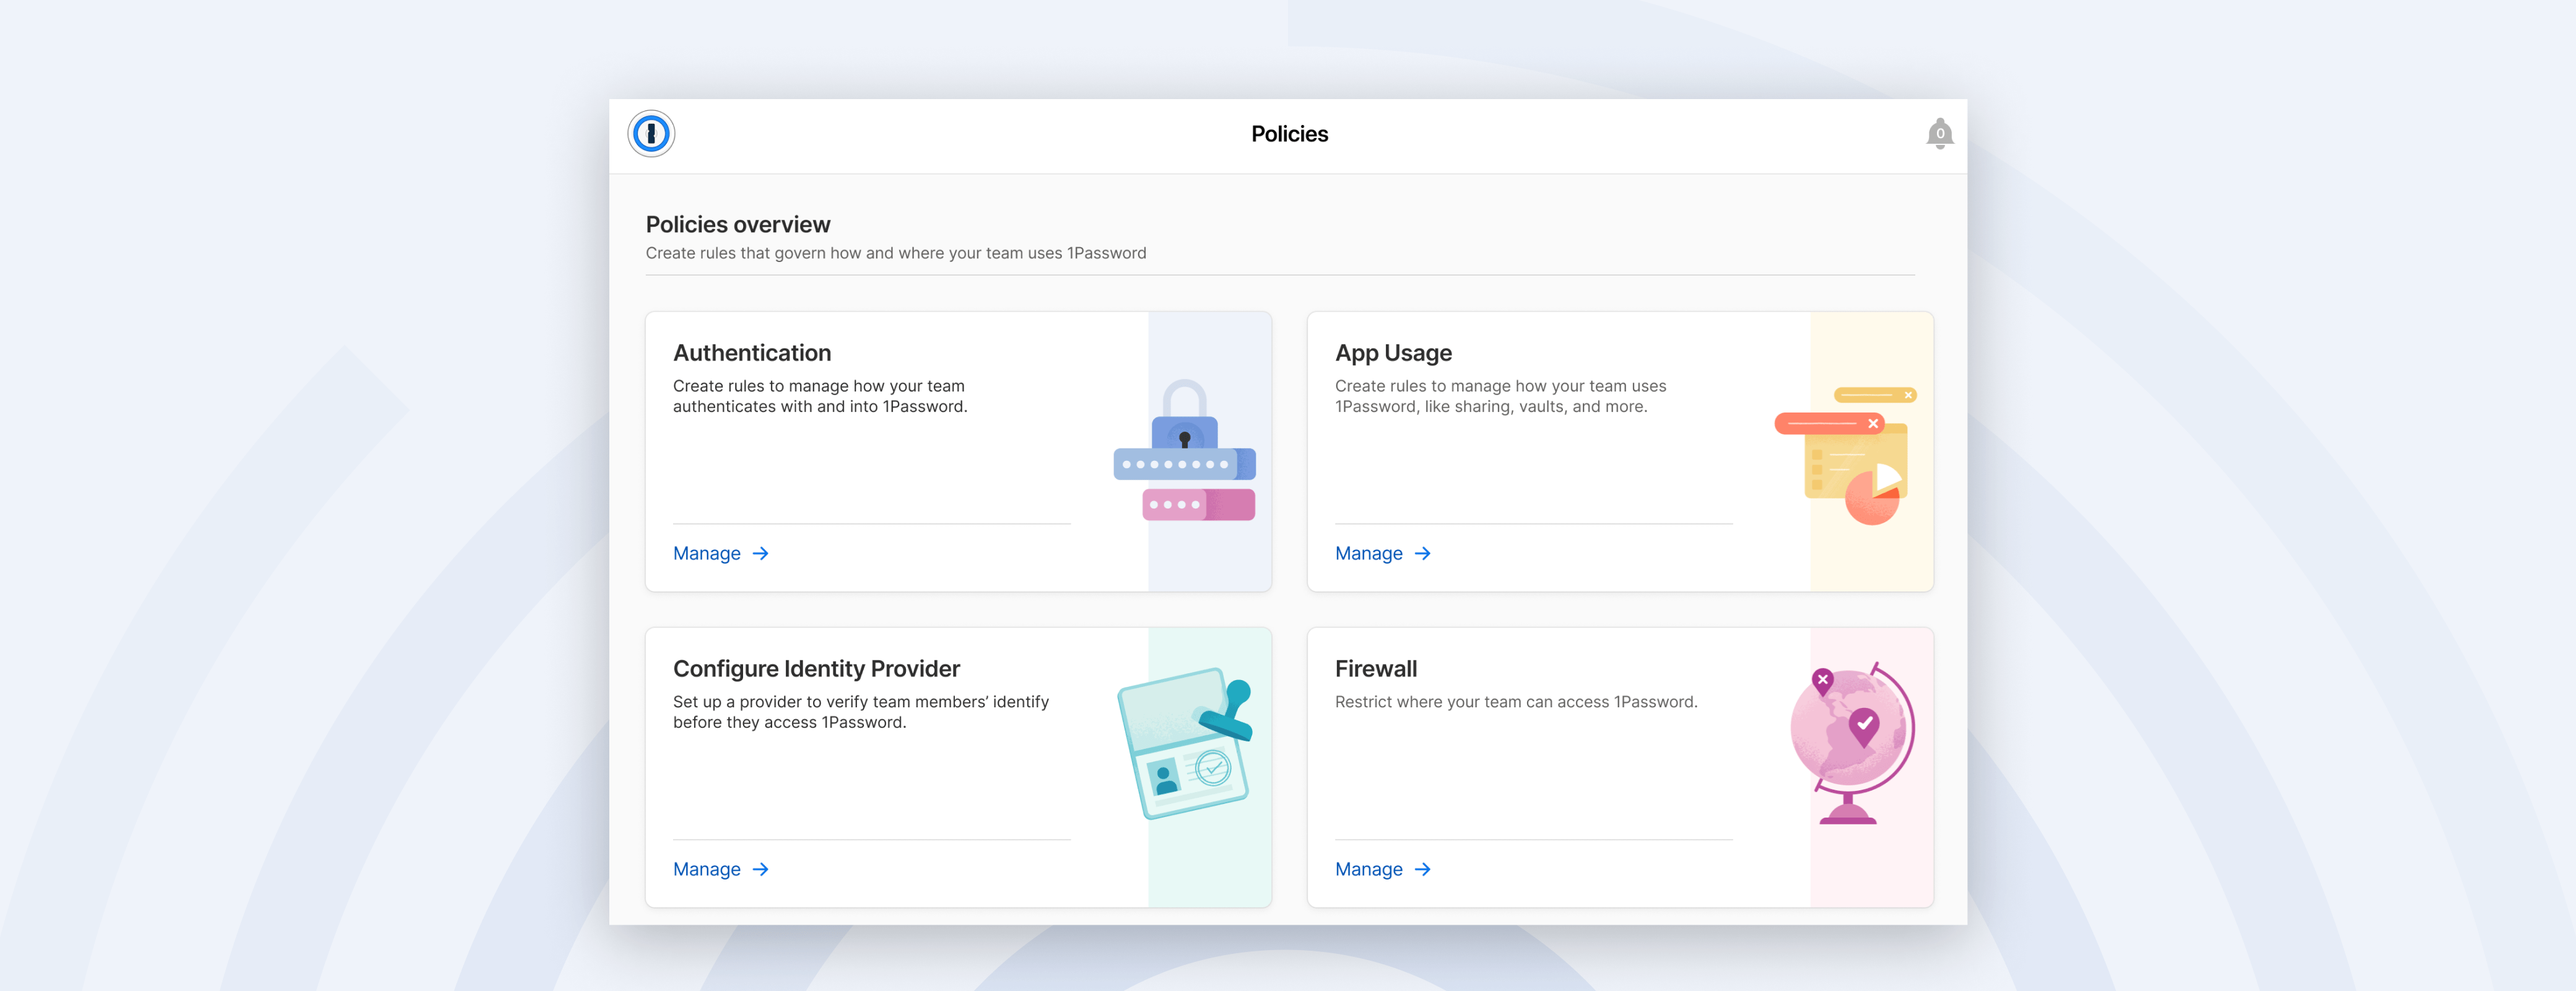 Easily govern how and where teams use 1Password from the new policies page